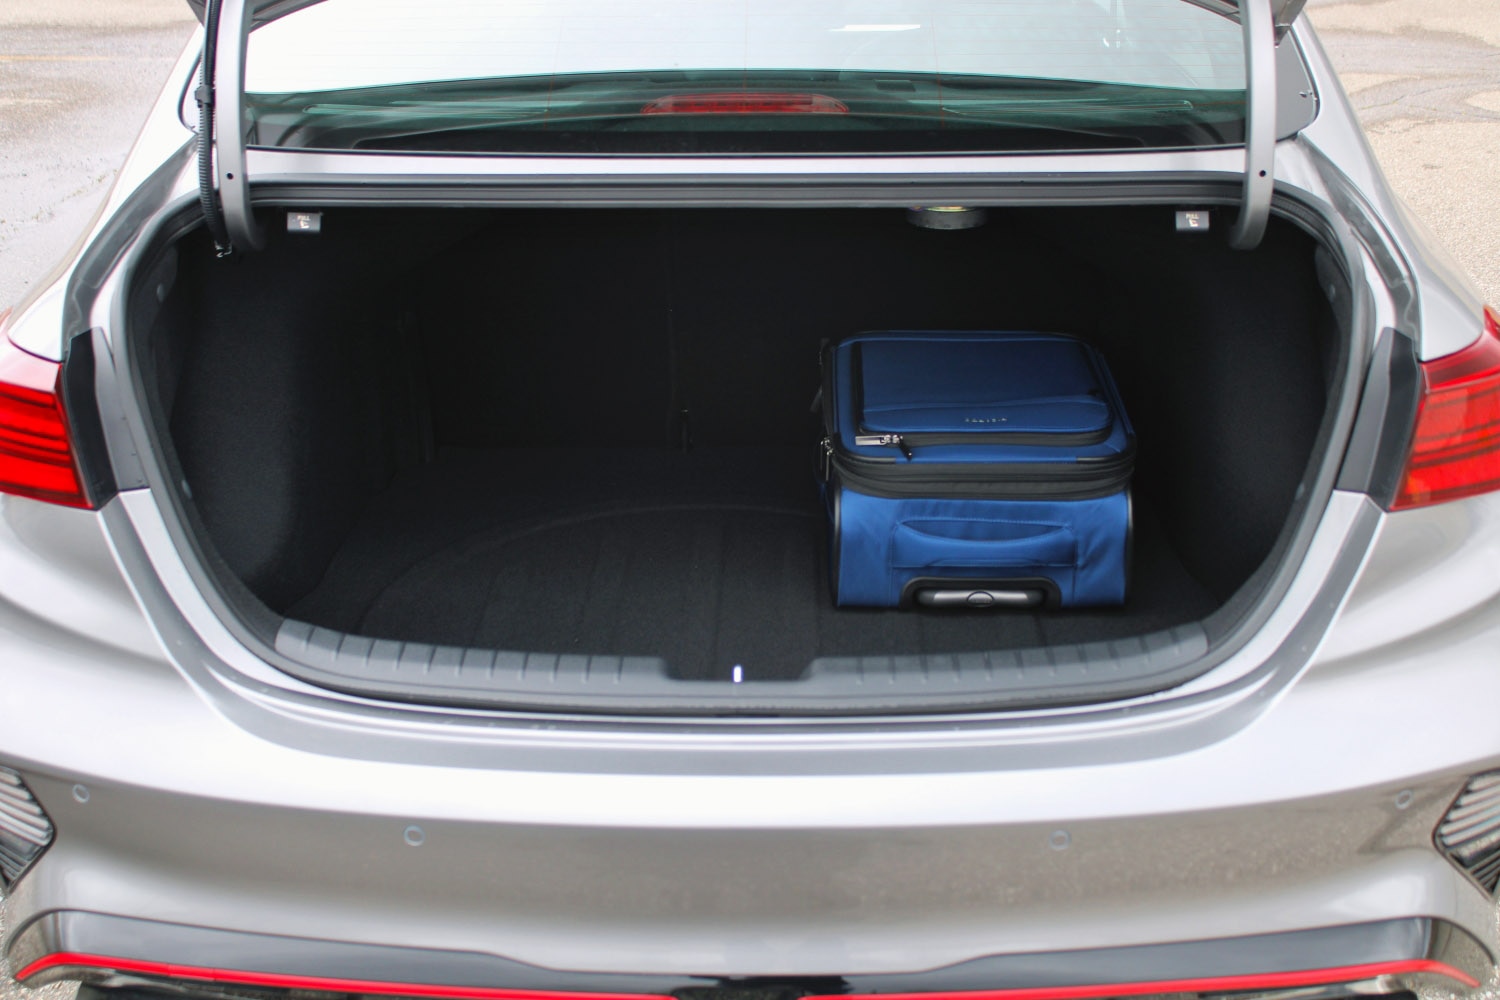 2022 Kia Forte GT with trunk open, showing cargo space with carry-on luggage bag inside